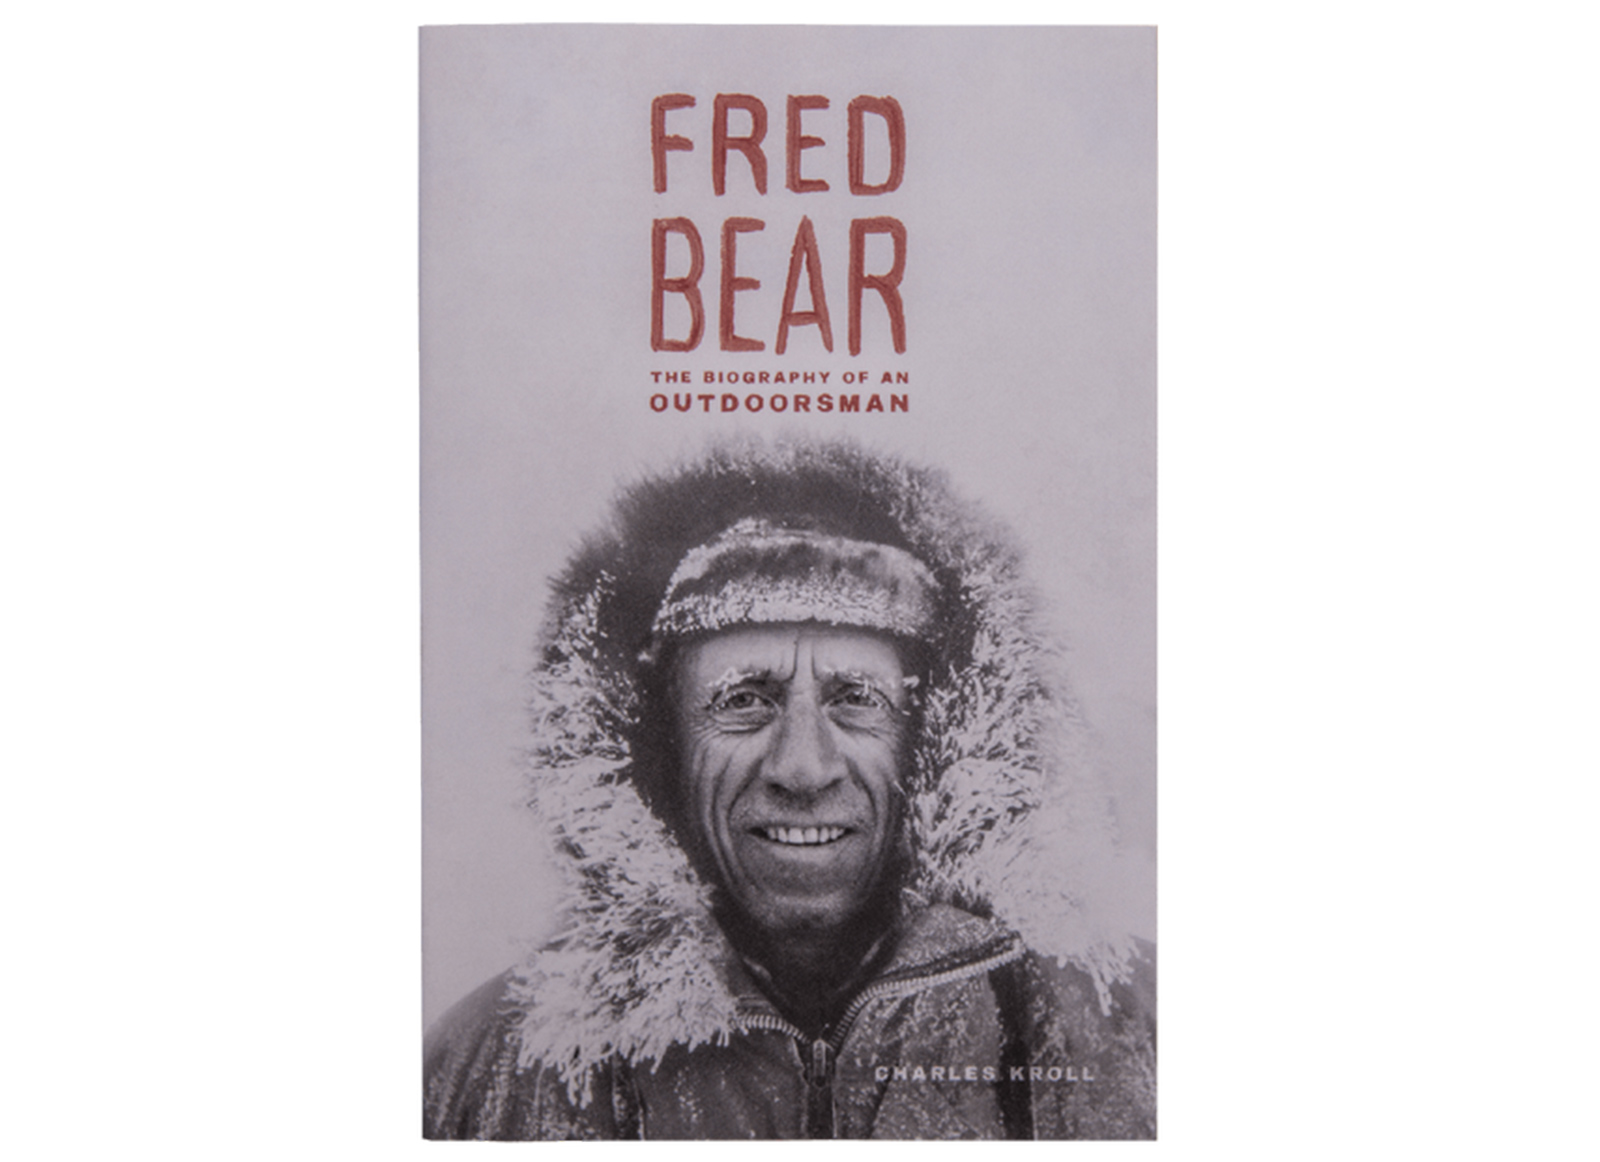 FRED BEAR THE BIOGRAPHY OF A OUTDOORSMAN